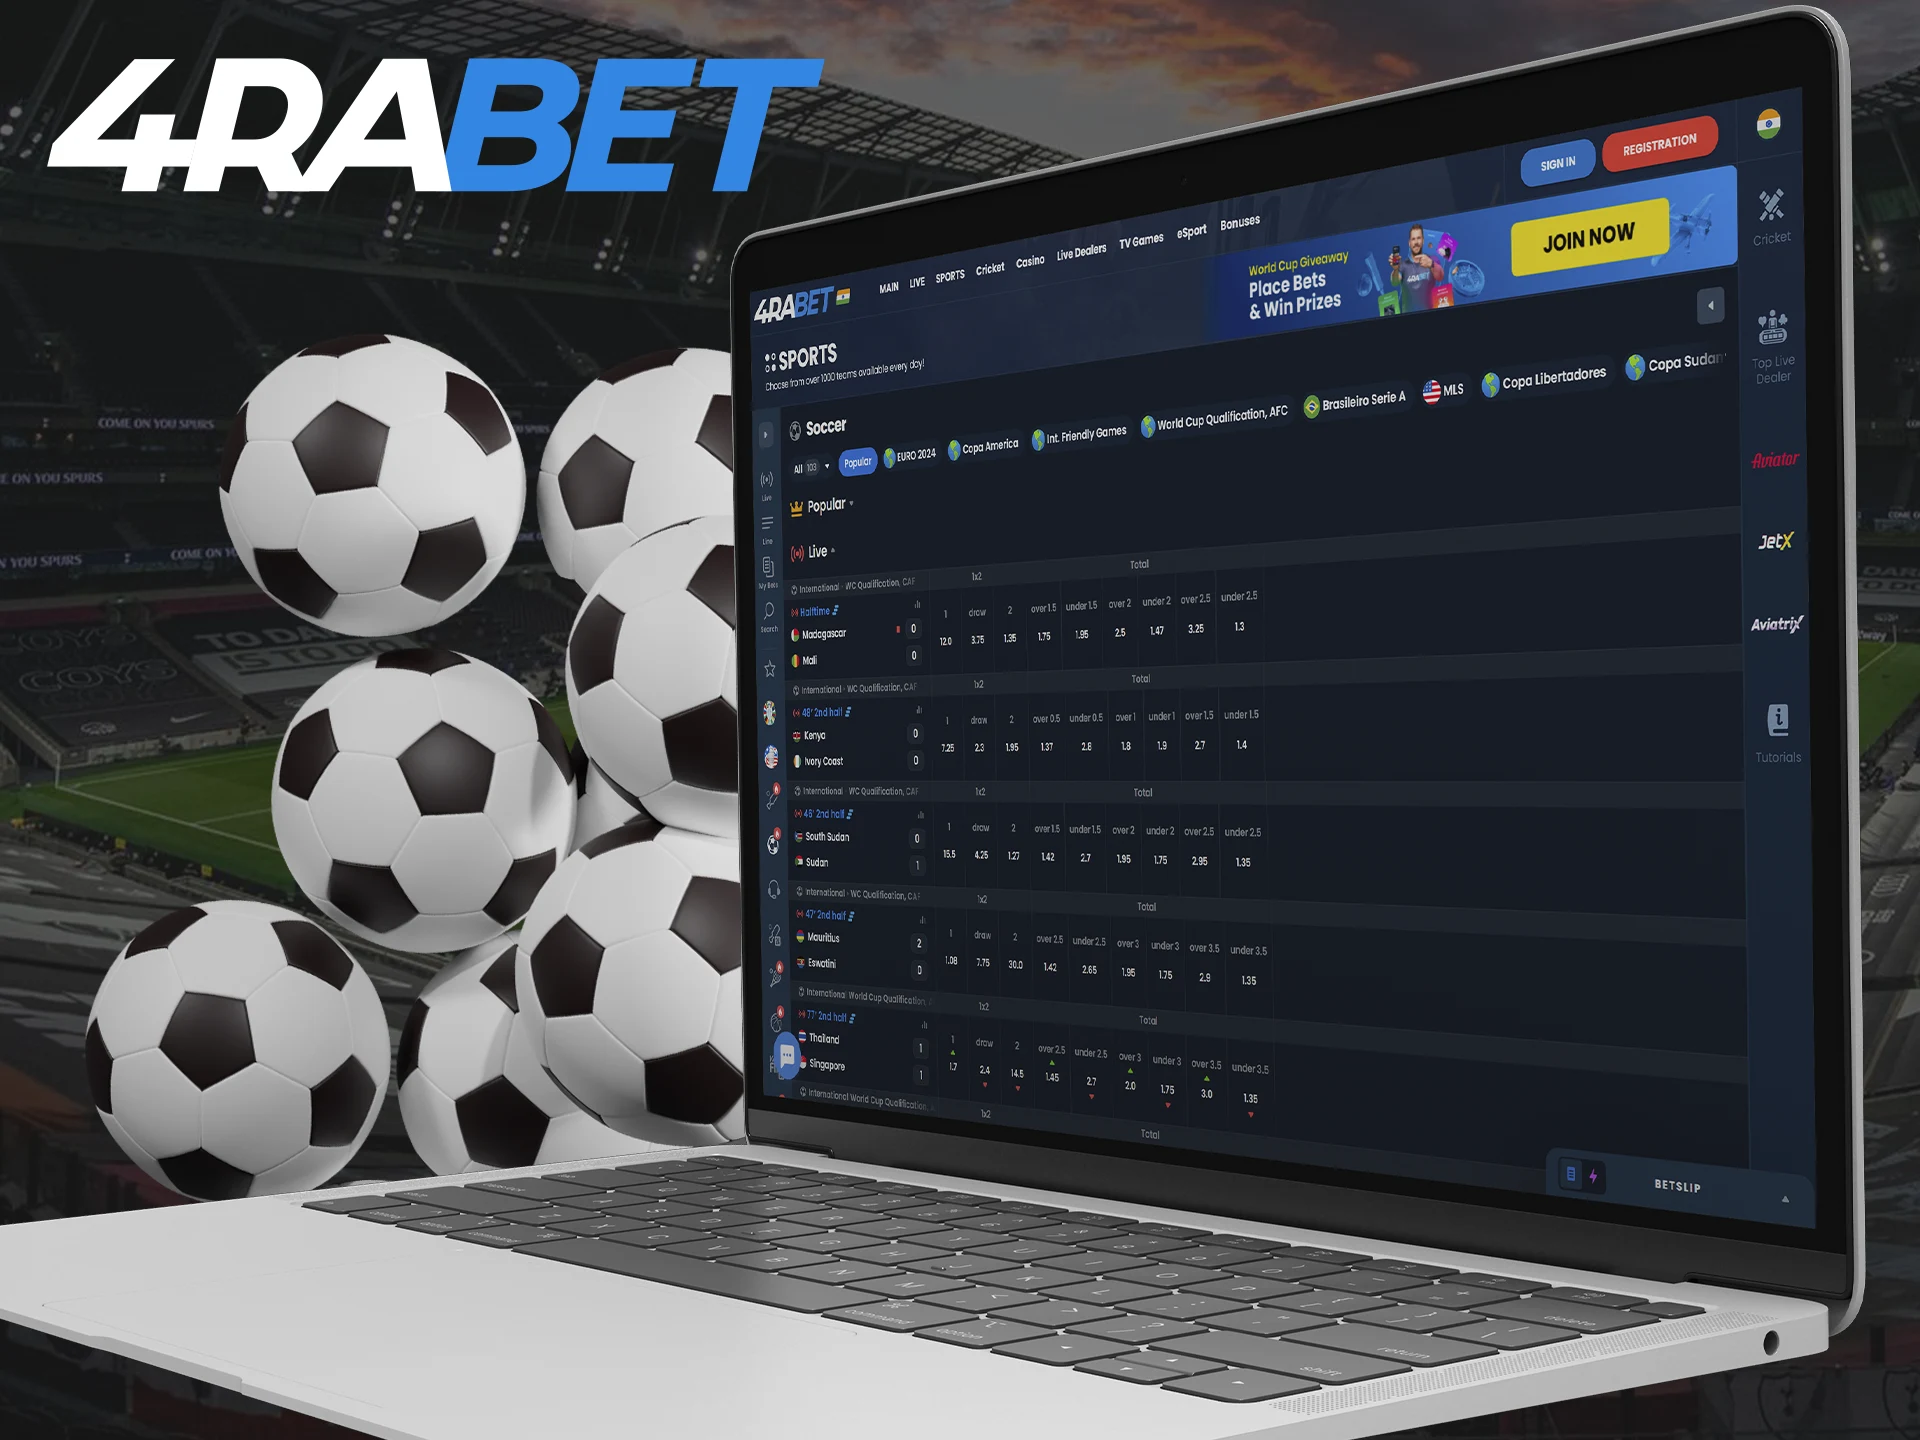 Find out why many people choose 4Rabet for football betting.